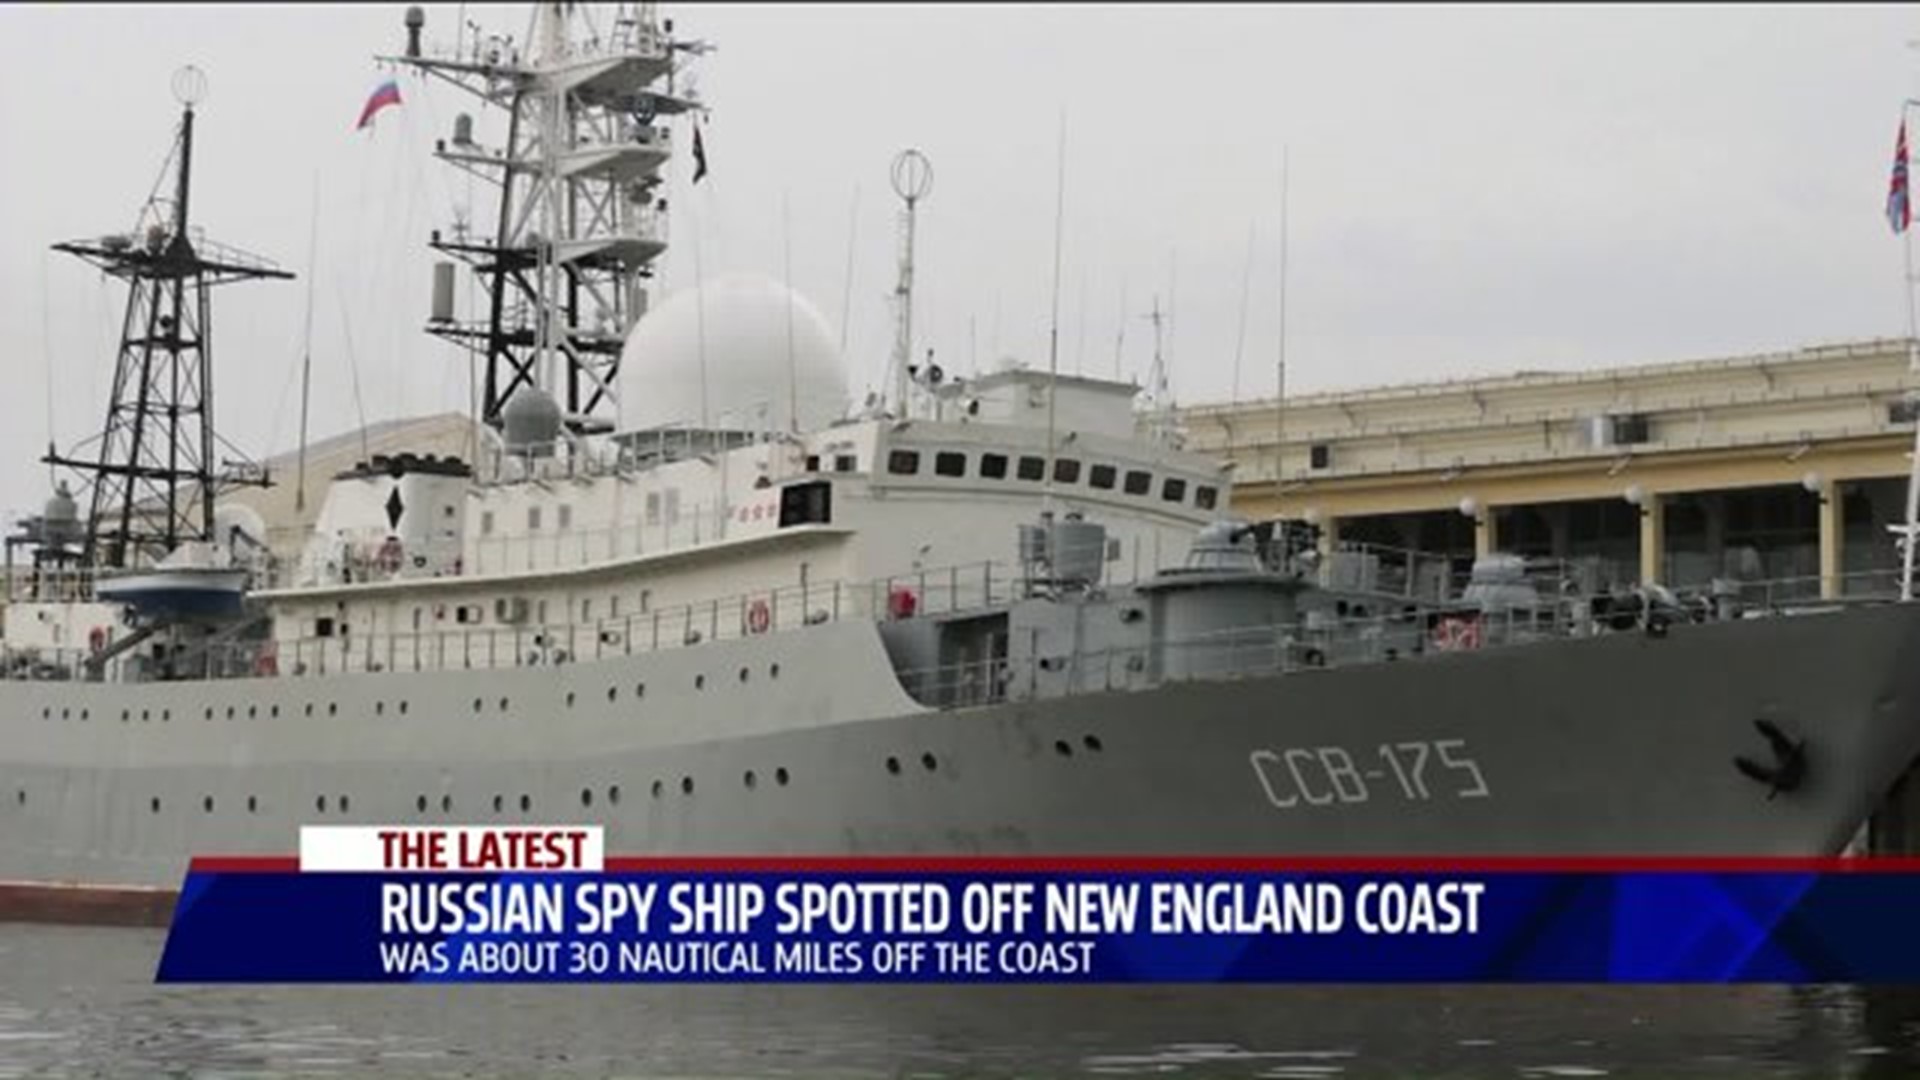 Courtney weighs in on Russian spy ship